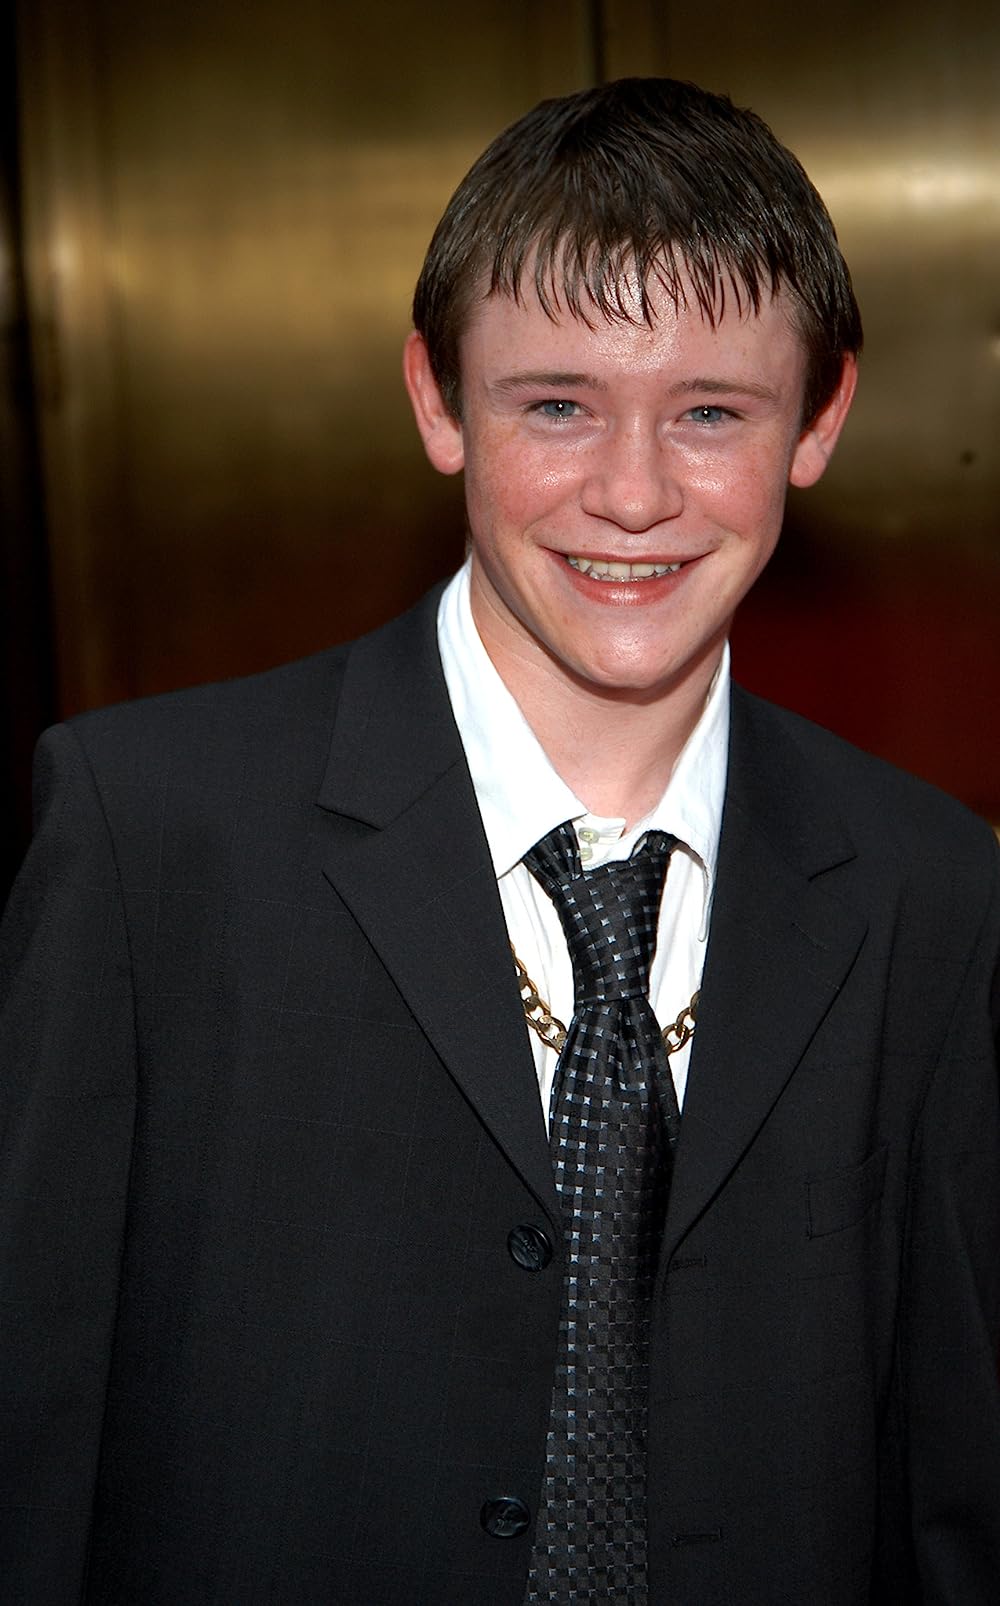 Who played Seamus Finnigan in the Harry Potter series? 2